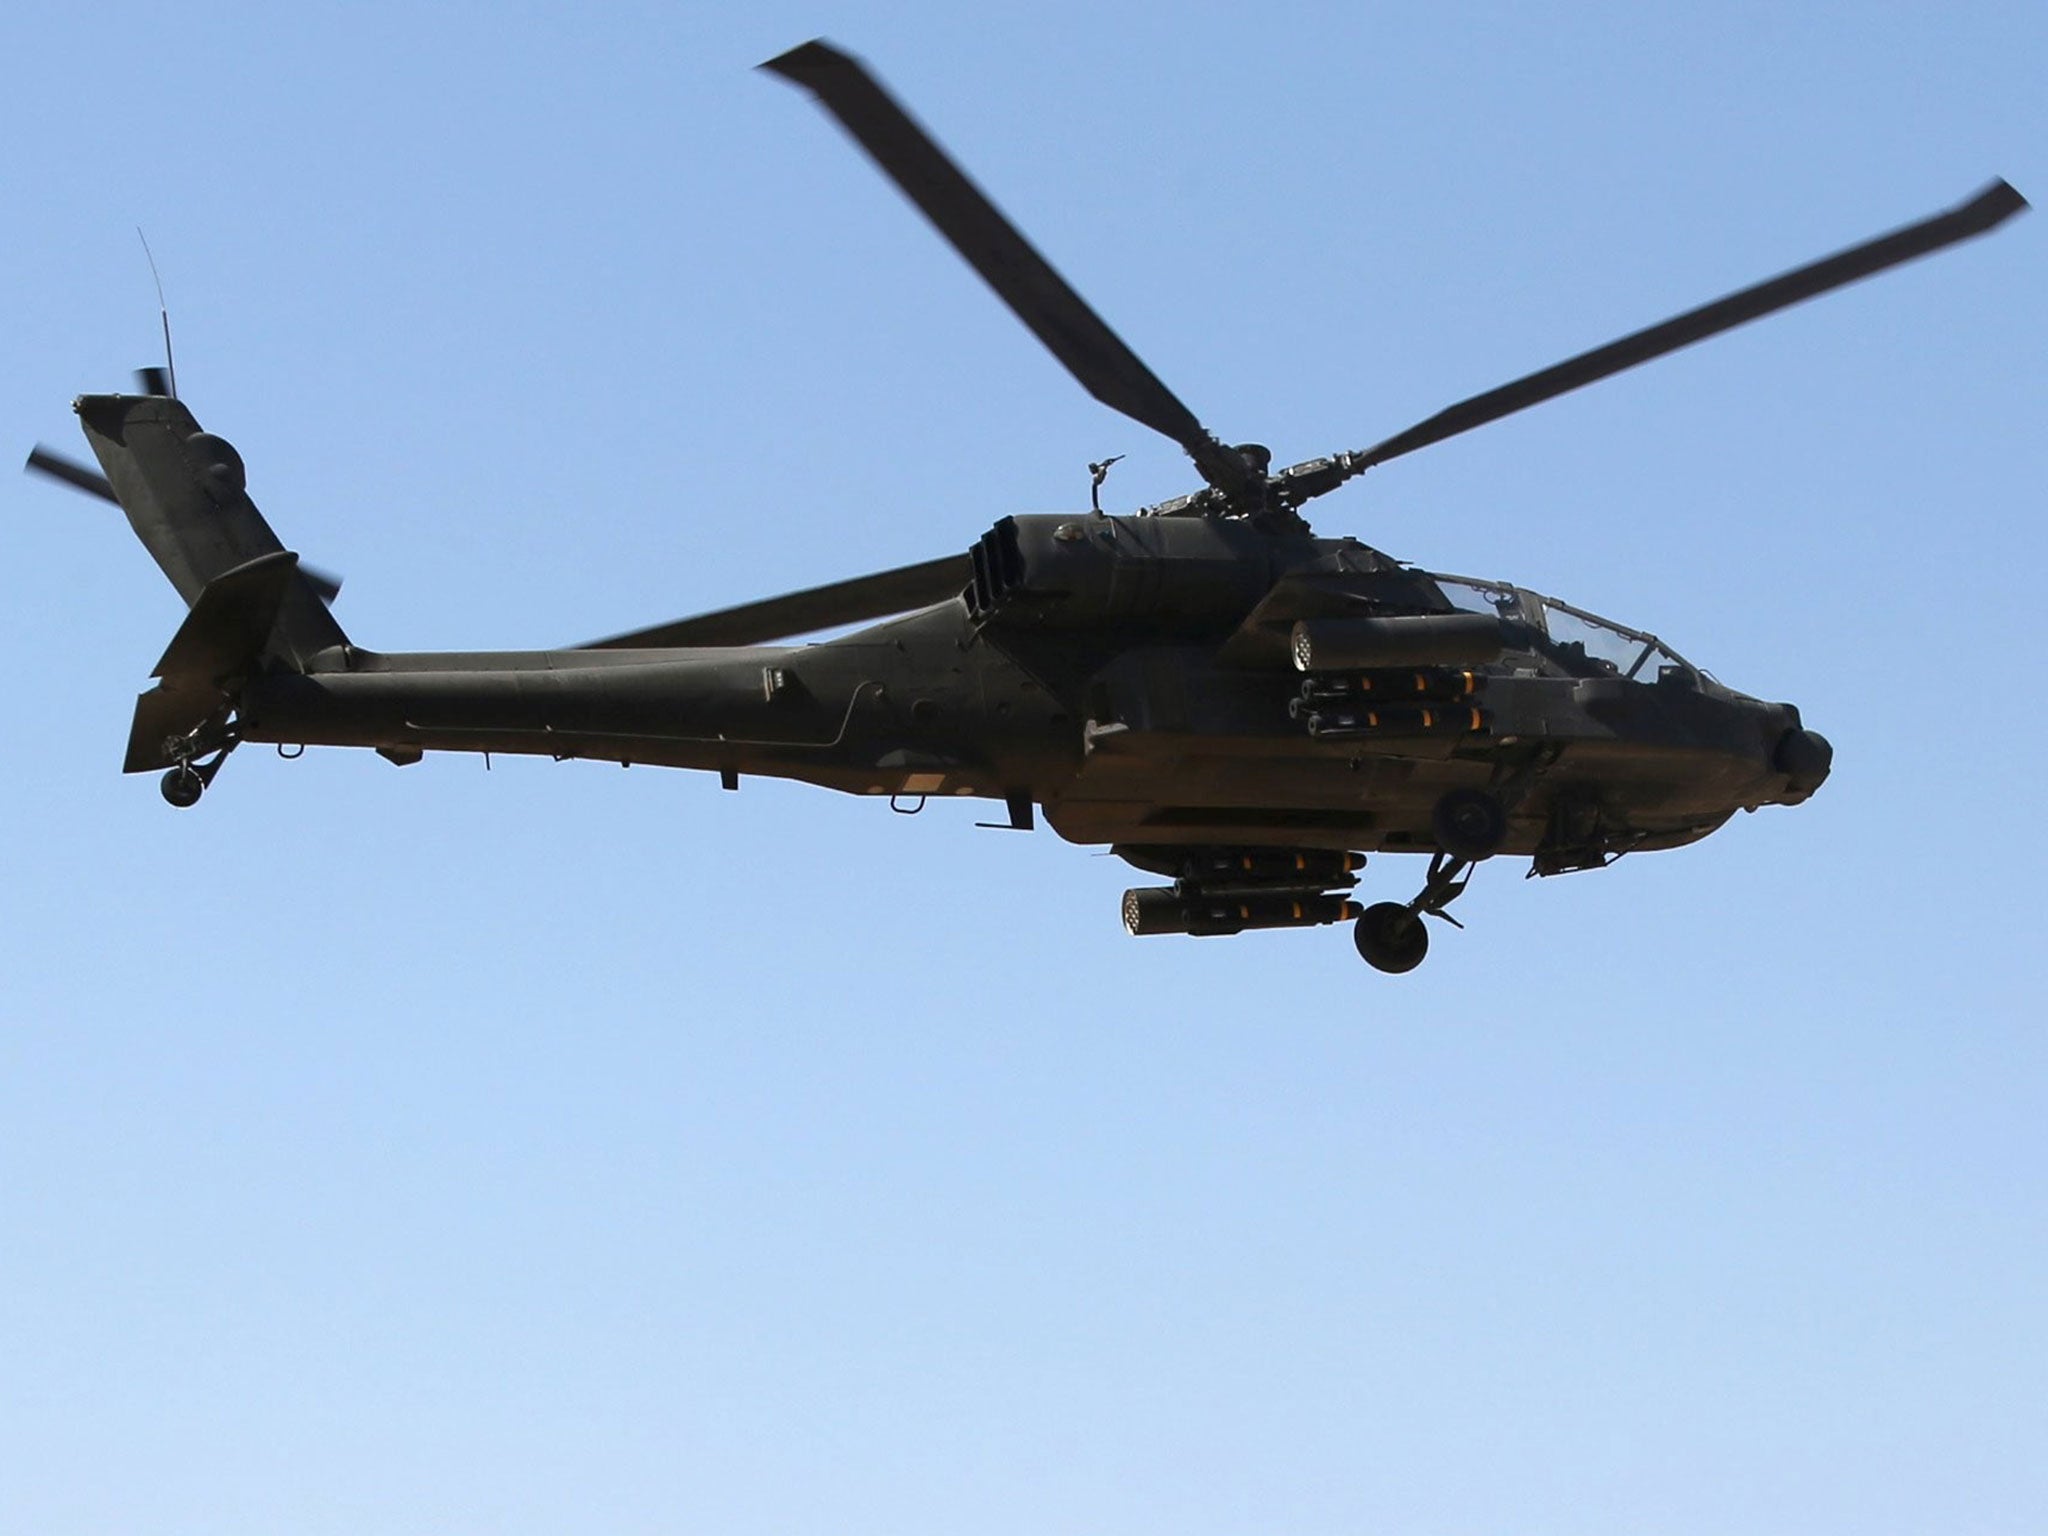 An Egyptian military helicopter in the Sinai Peninsula